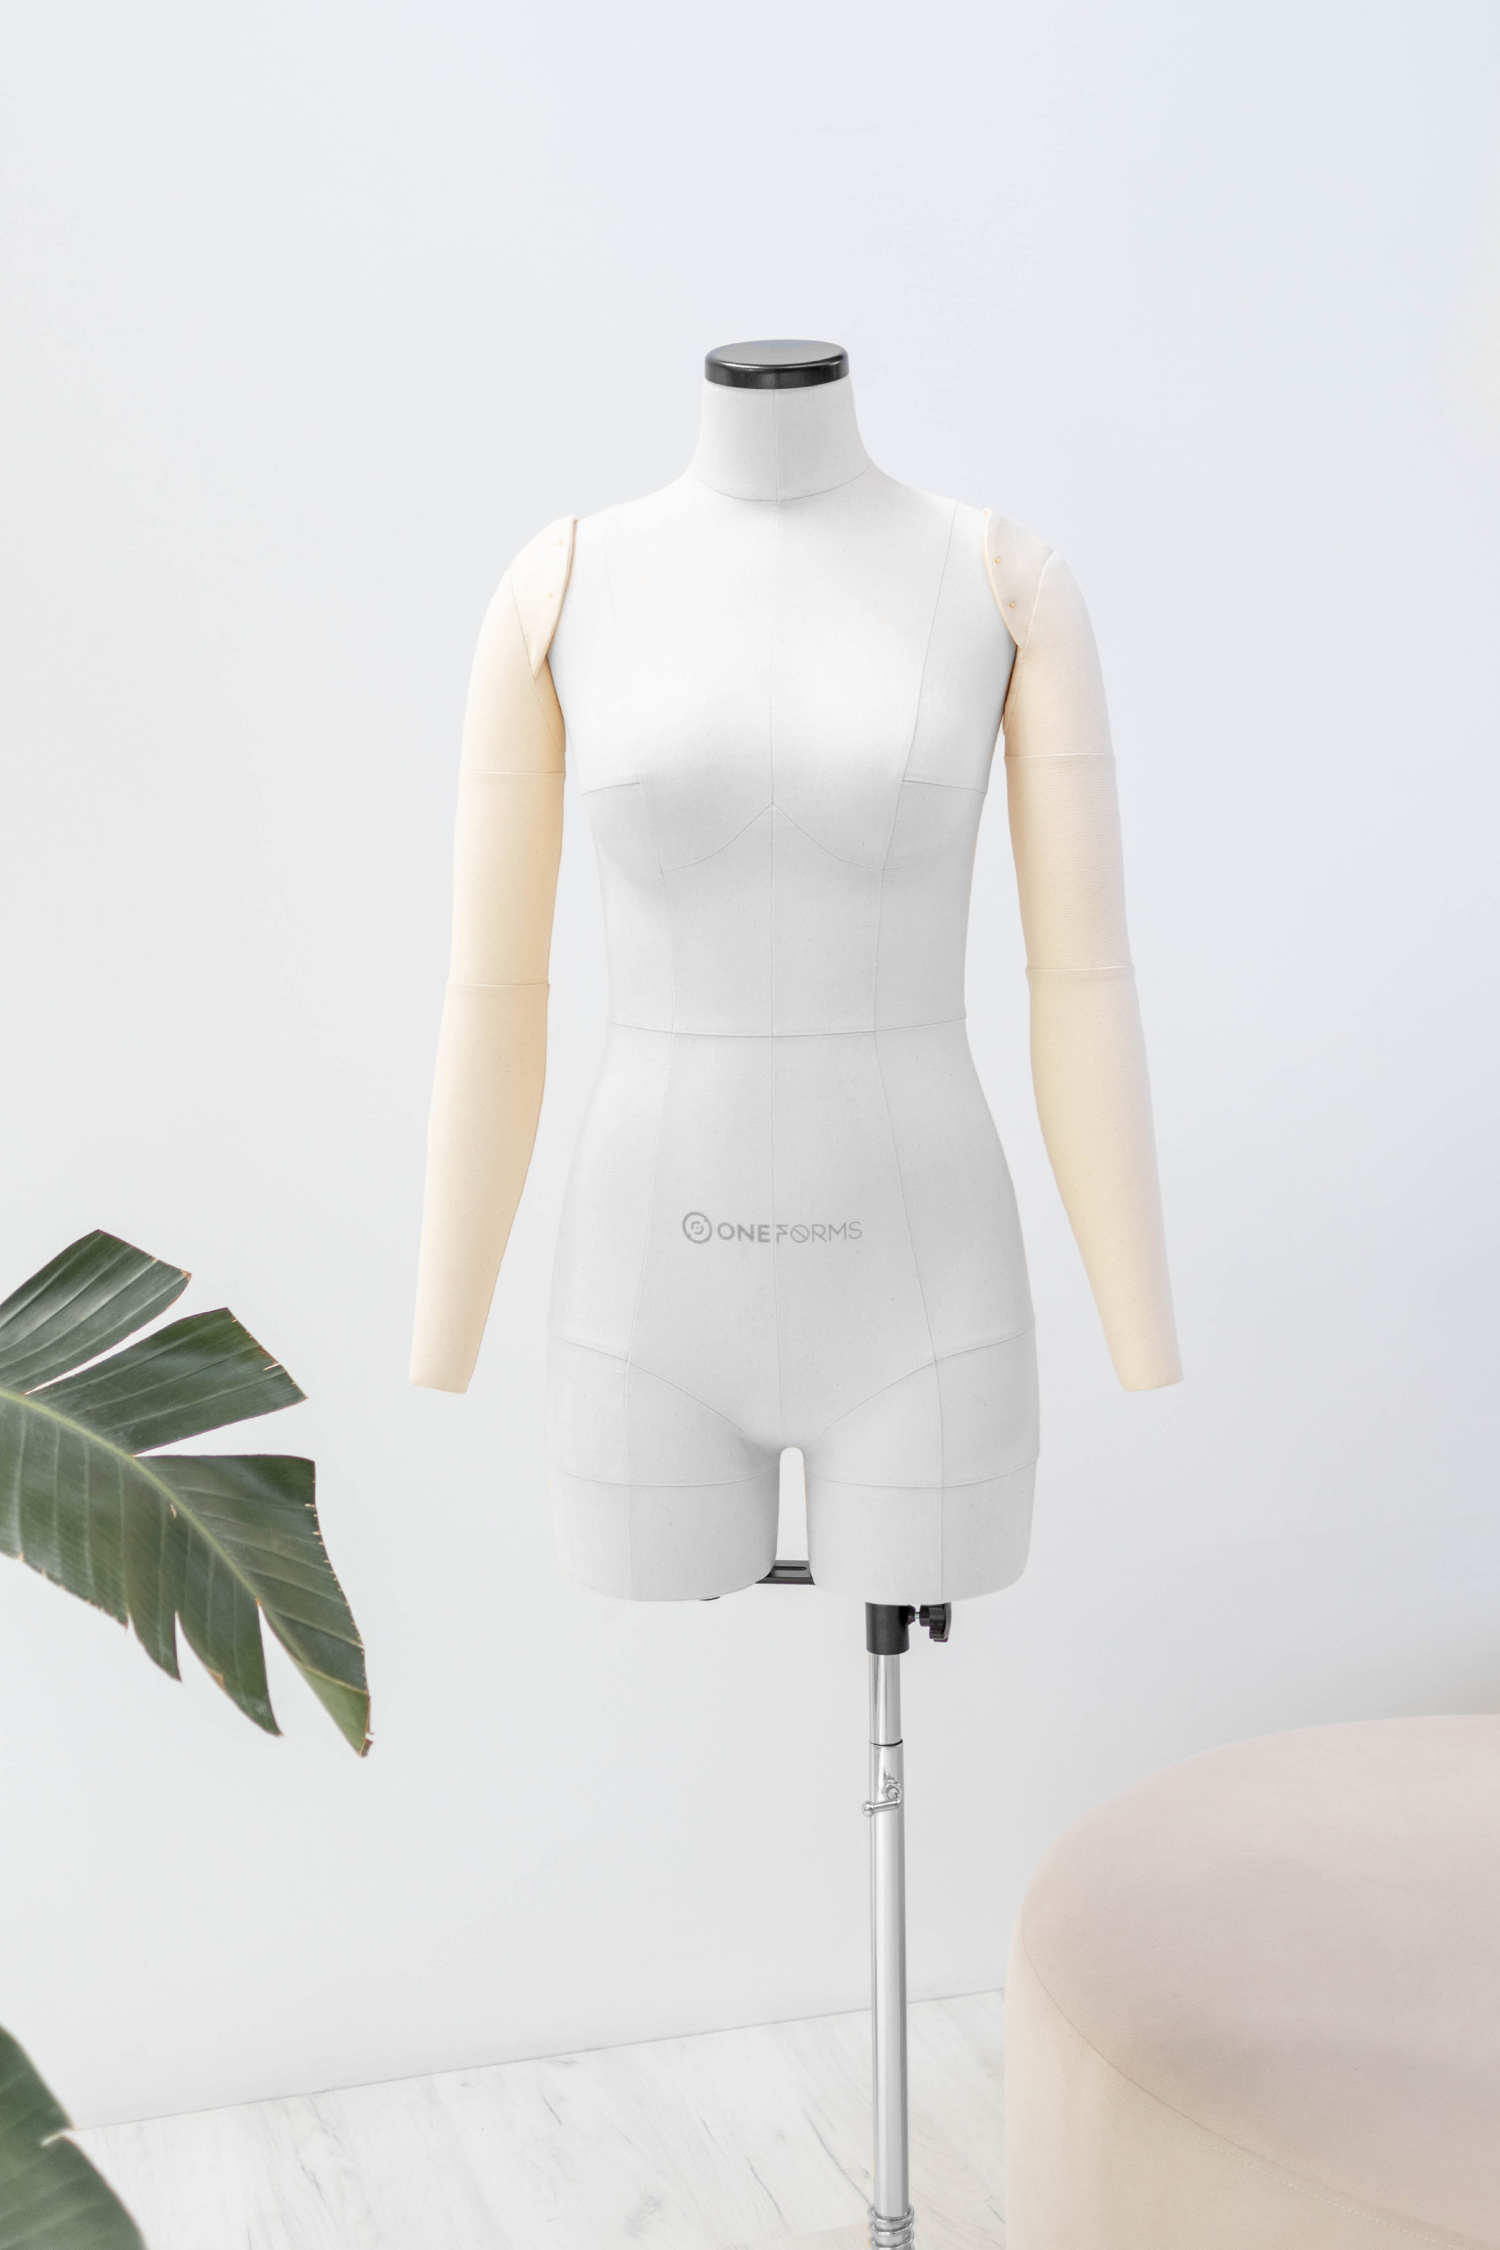 Anatomic tailor dress form SOFIA by ONE FORMS